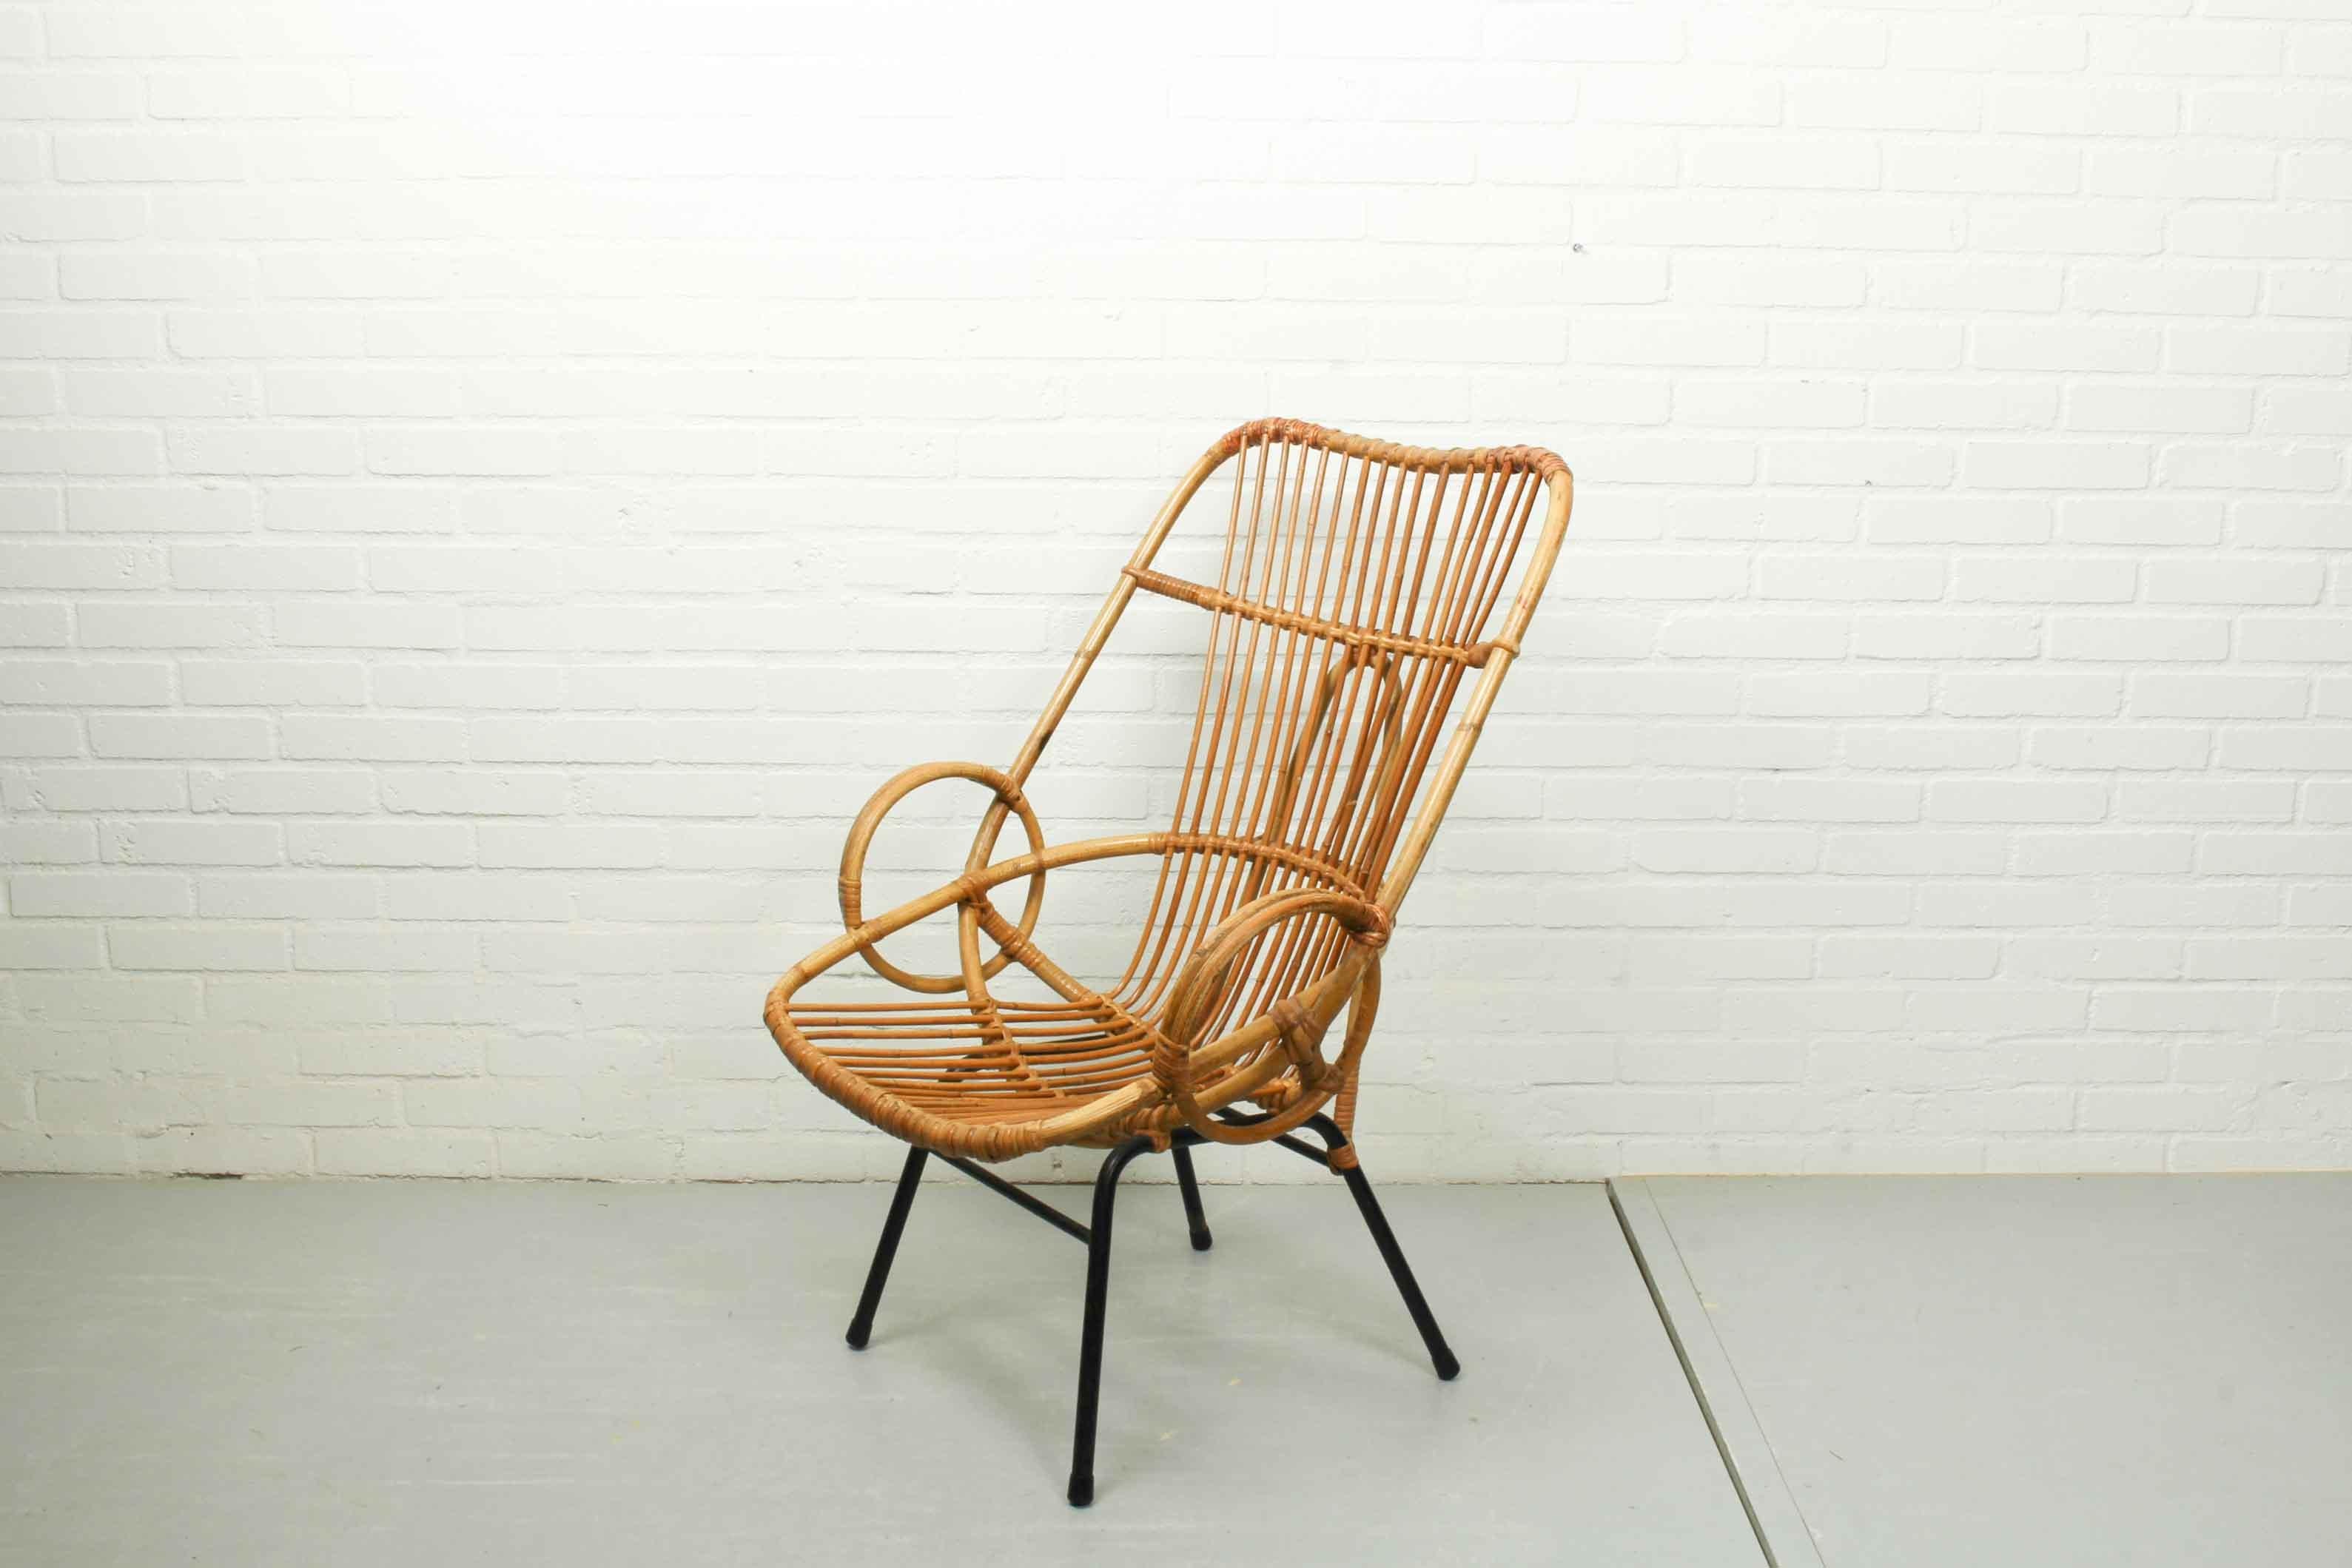 This armchair was manufactured by Rohé Noordwolde in the Netherlands in the 1960s.